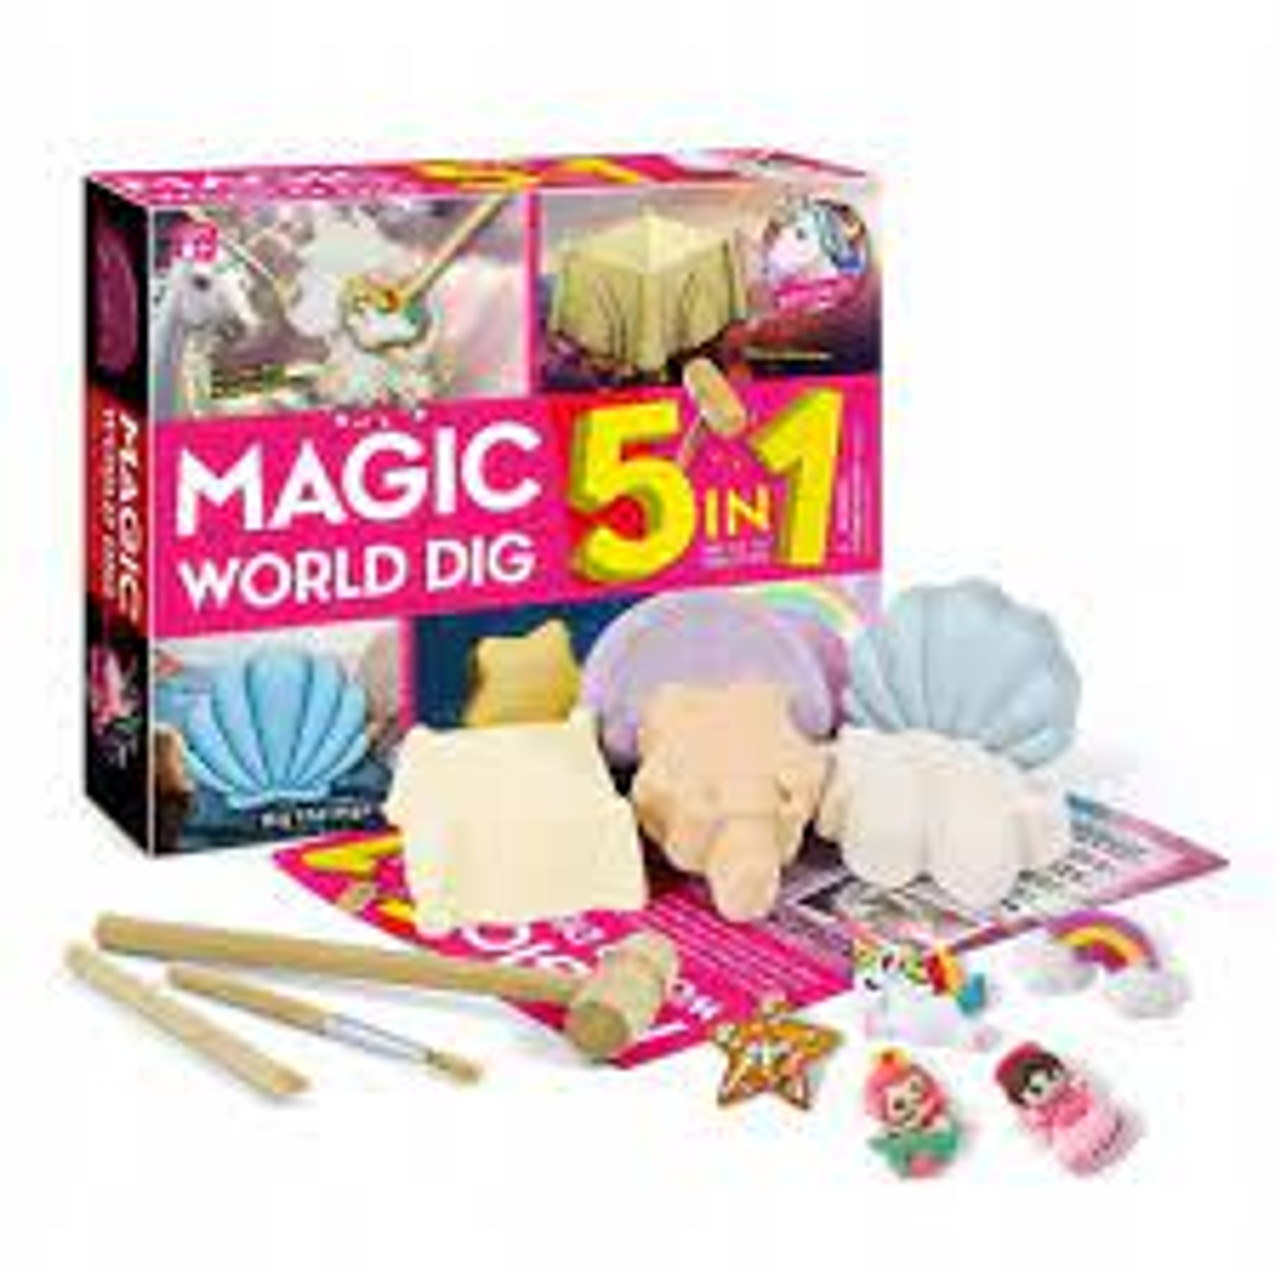 MAGIC WORLD DIG 5 IN 1